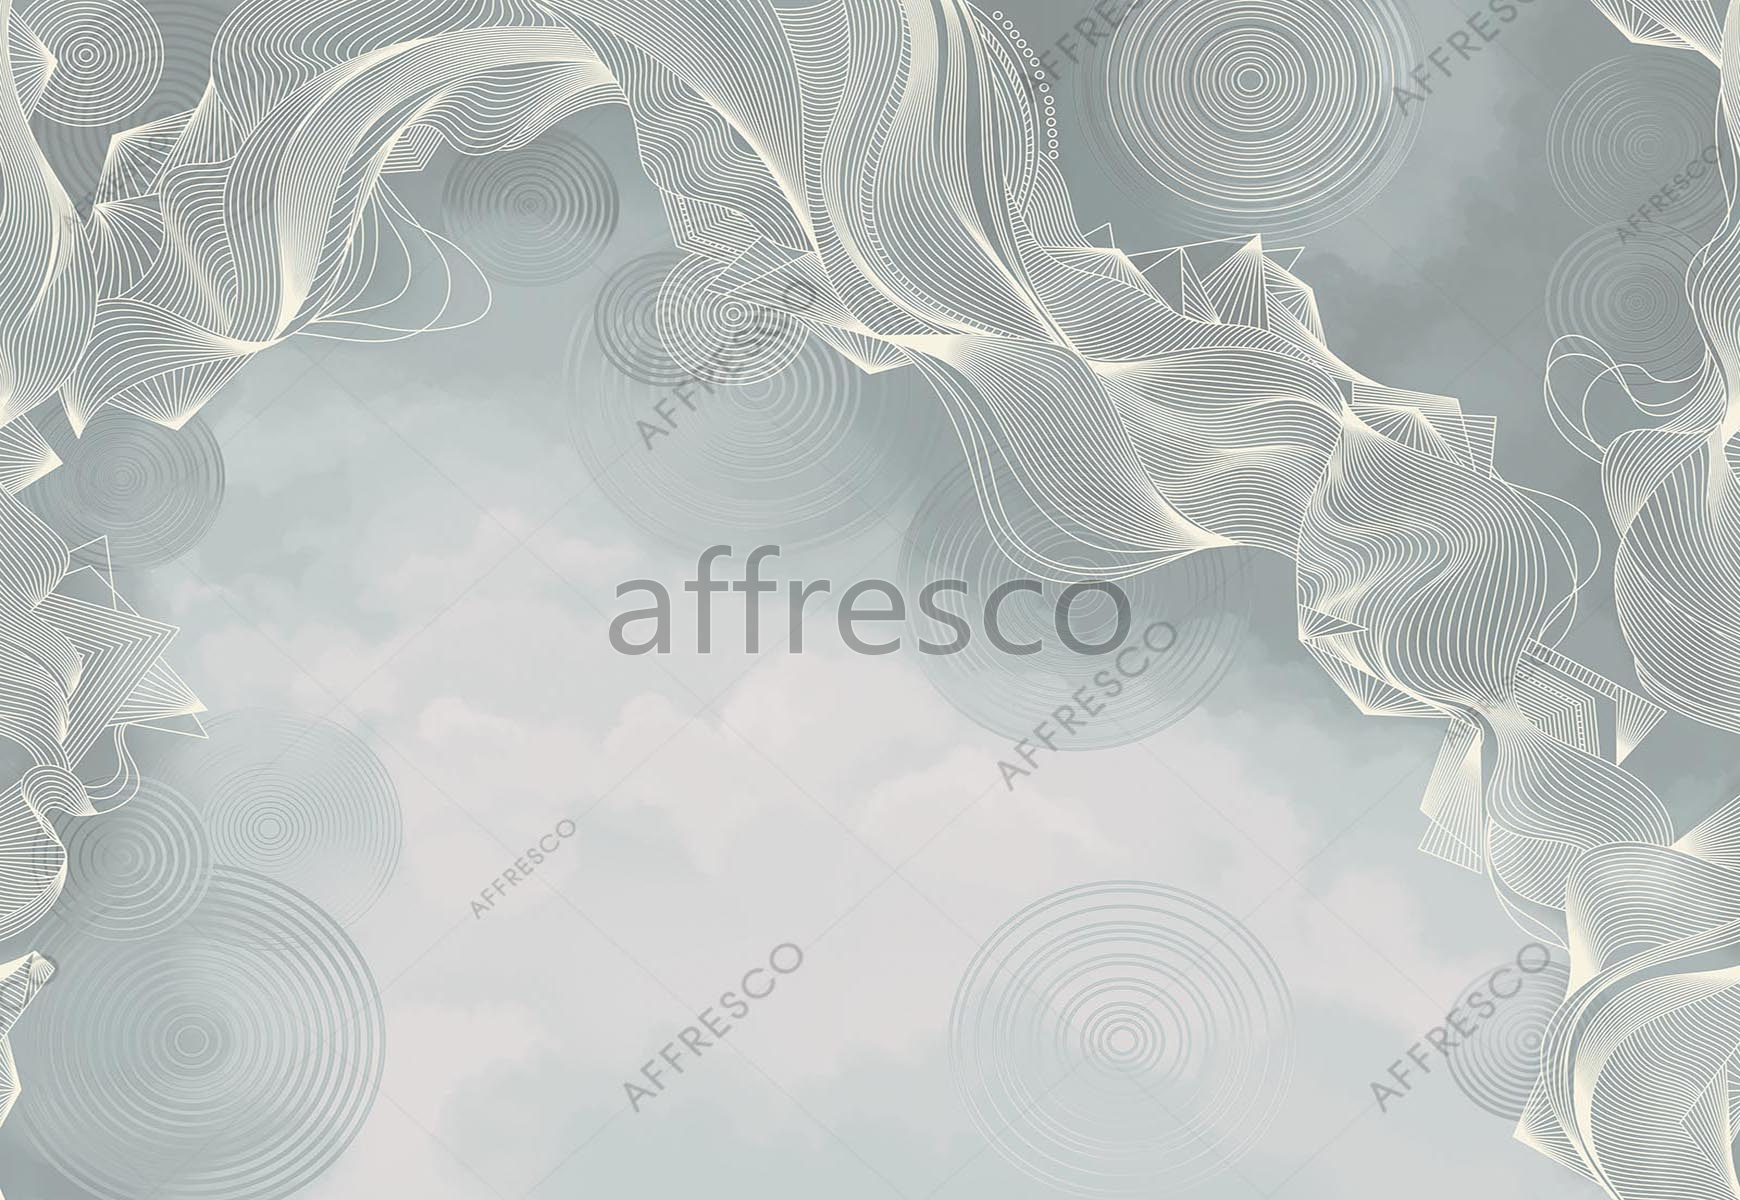 ID139173 | Geometry | clouds in motion | Affresco Factory